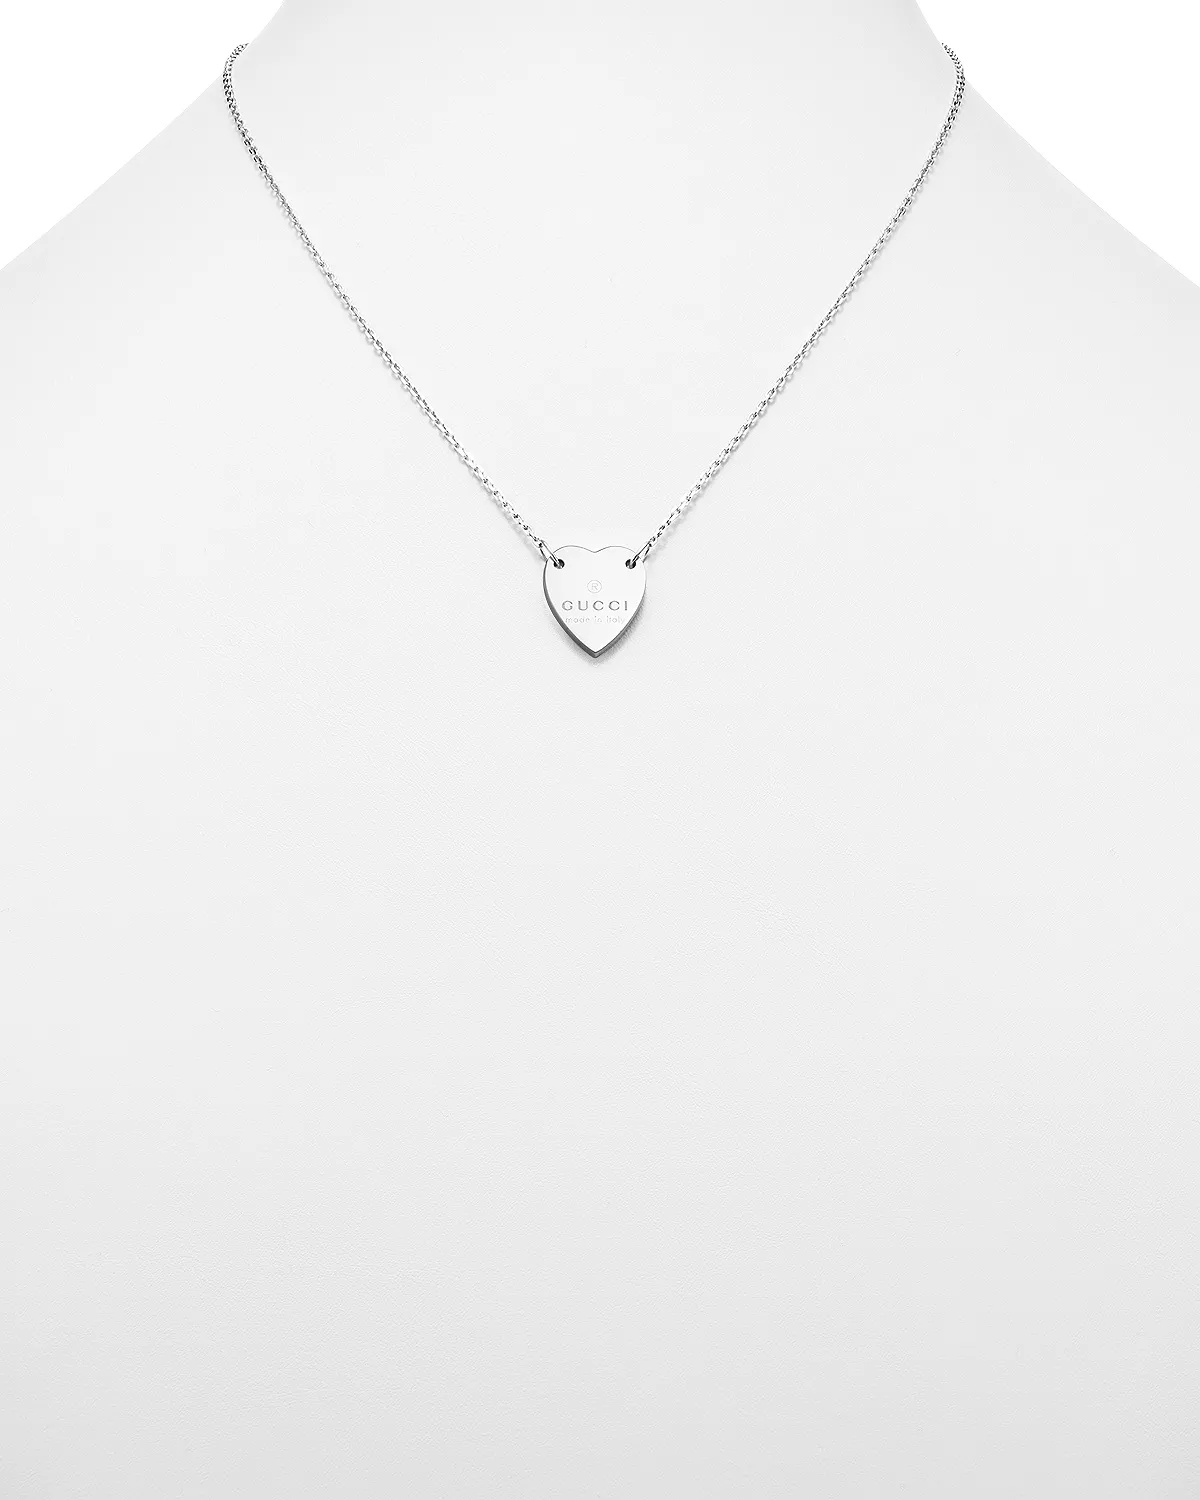 Sterling Silver Engraved Trademark Heart Necklace, 18" - 3